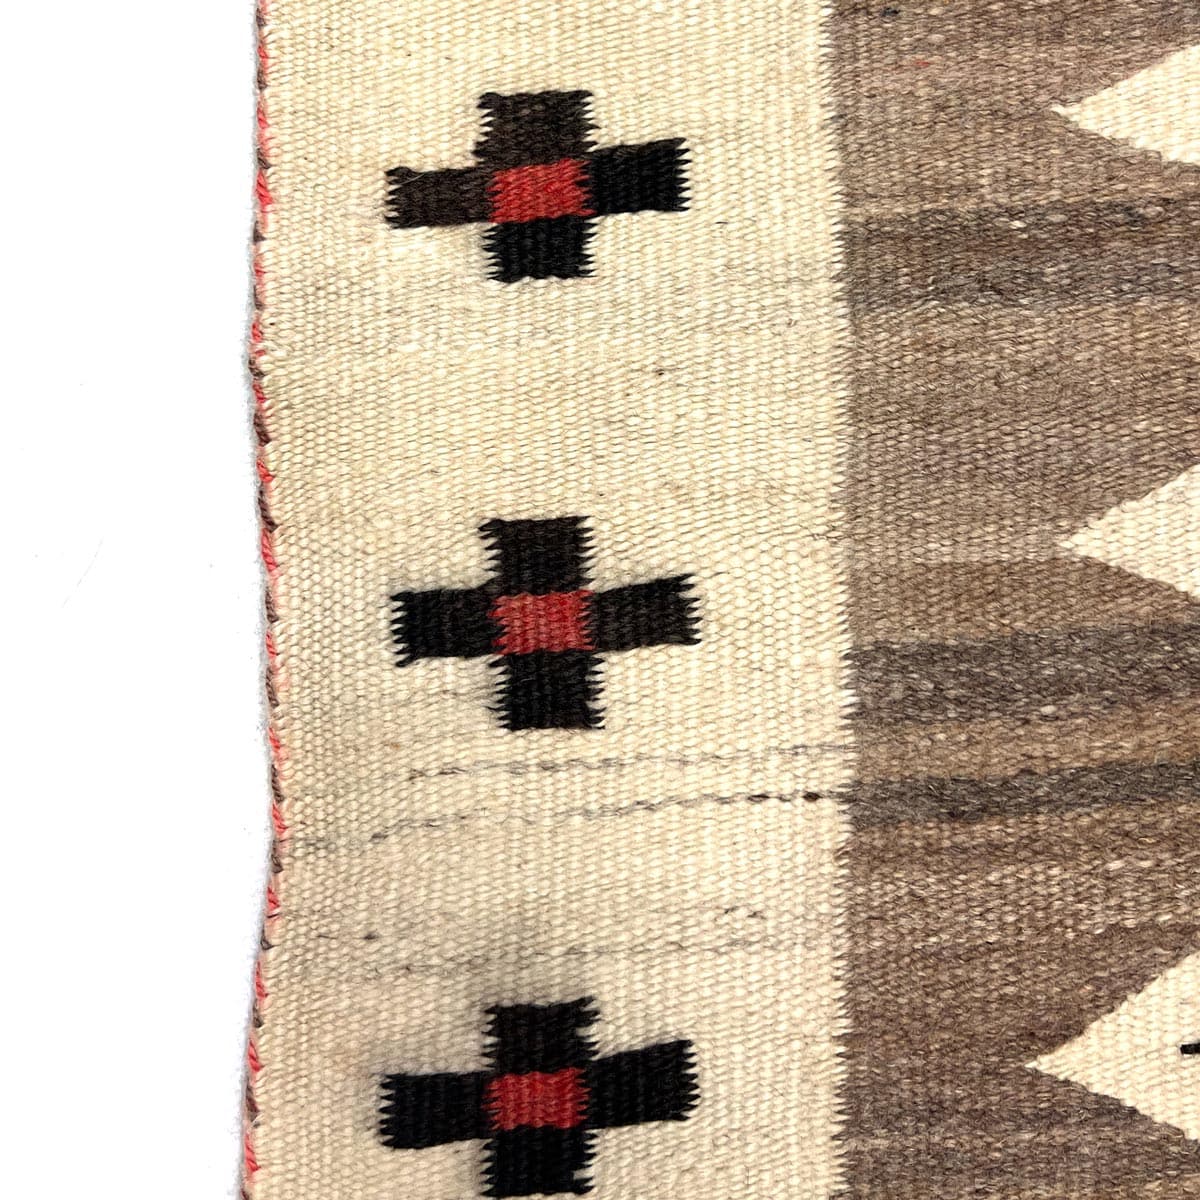 Navajo Crystal Rug with Cross Designs c. 1880-1893, 75.5" x 53.5" (T91654A-0422-005) 2